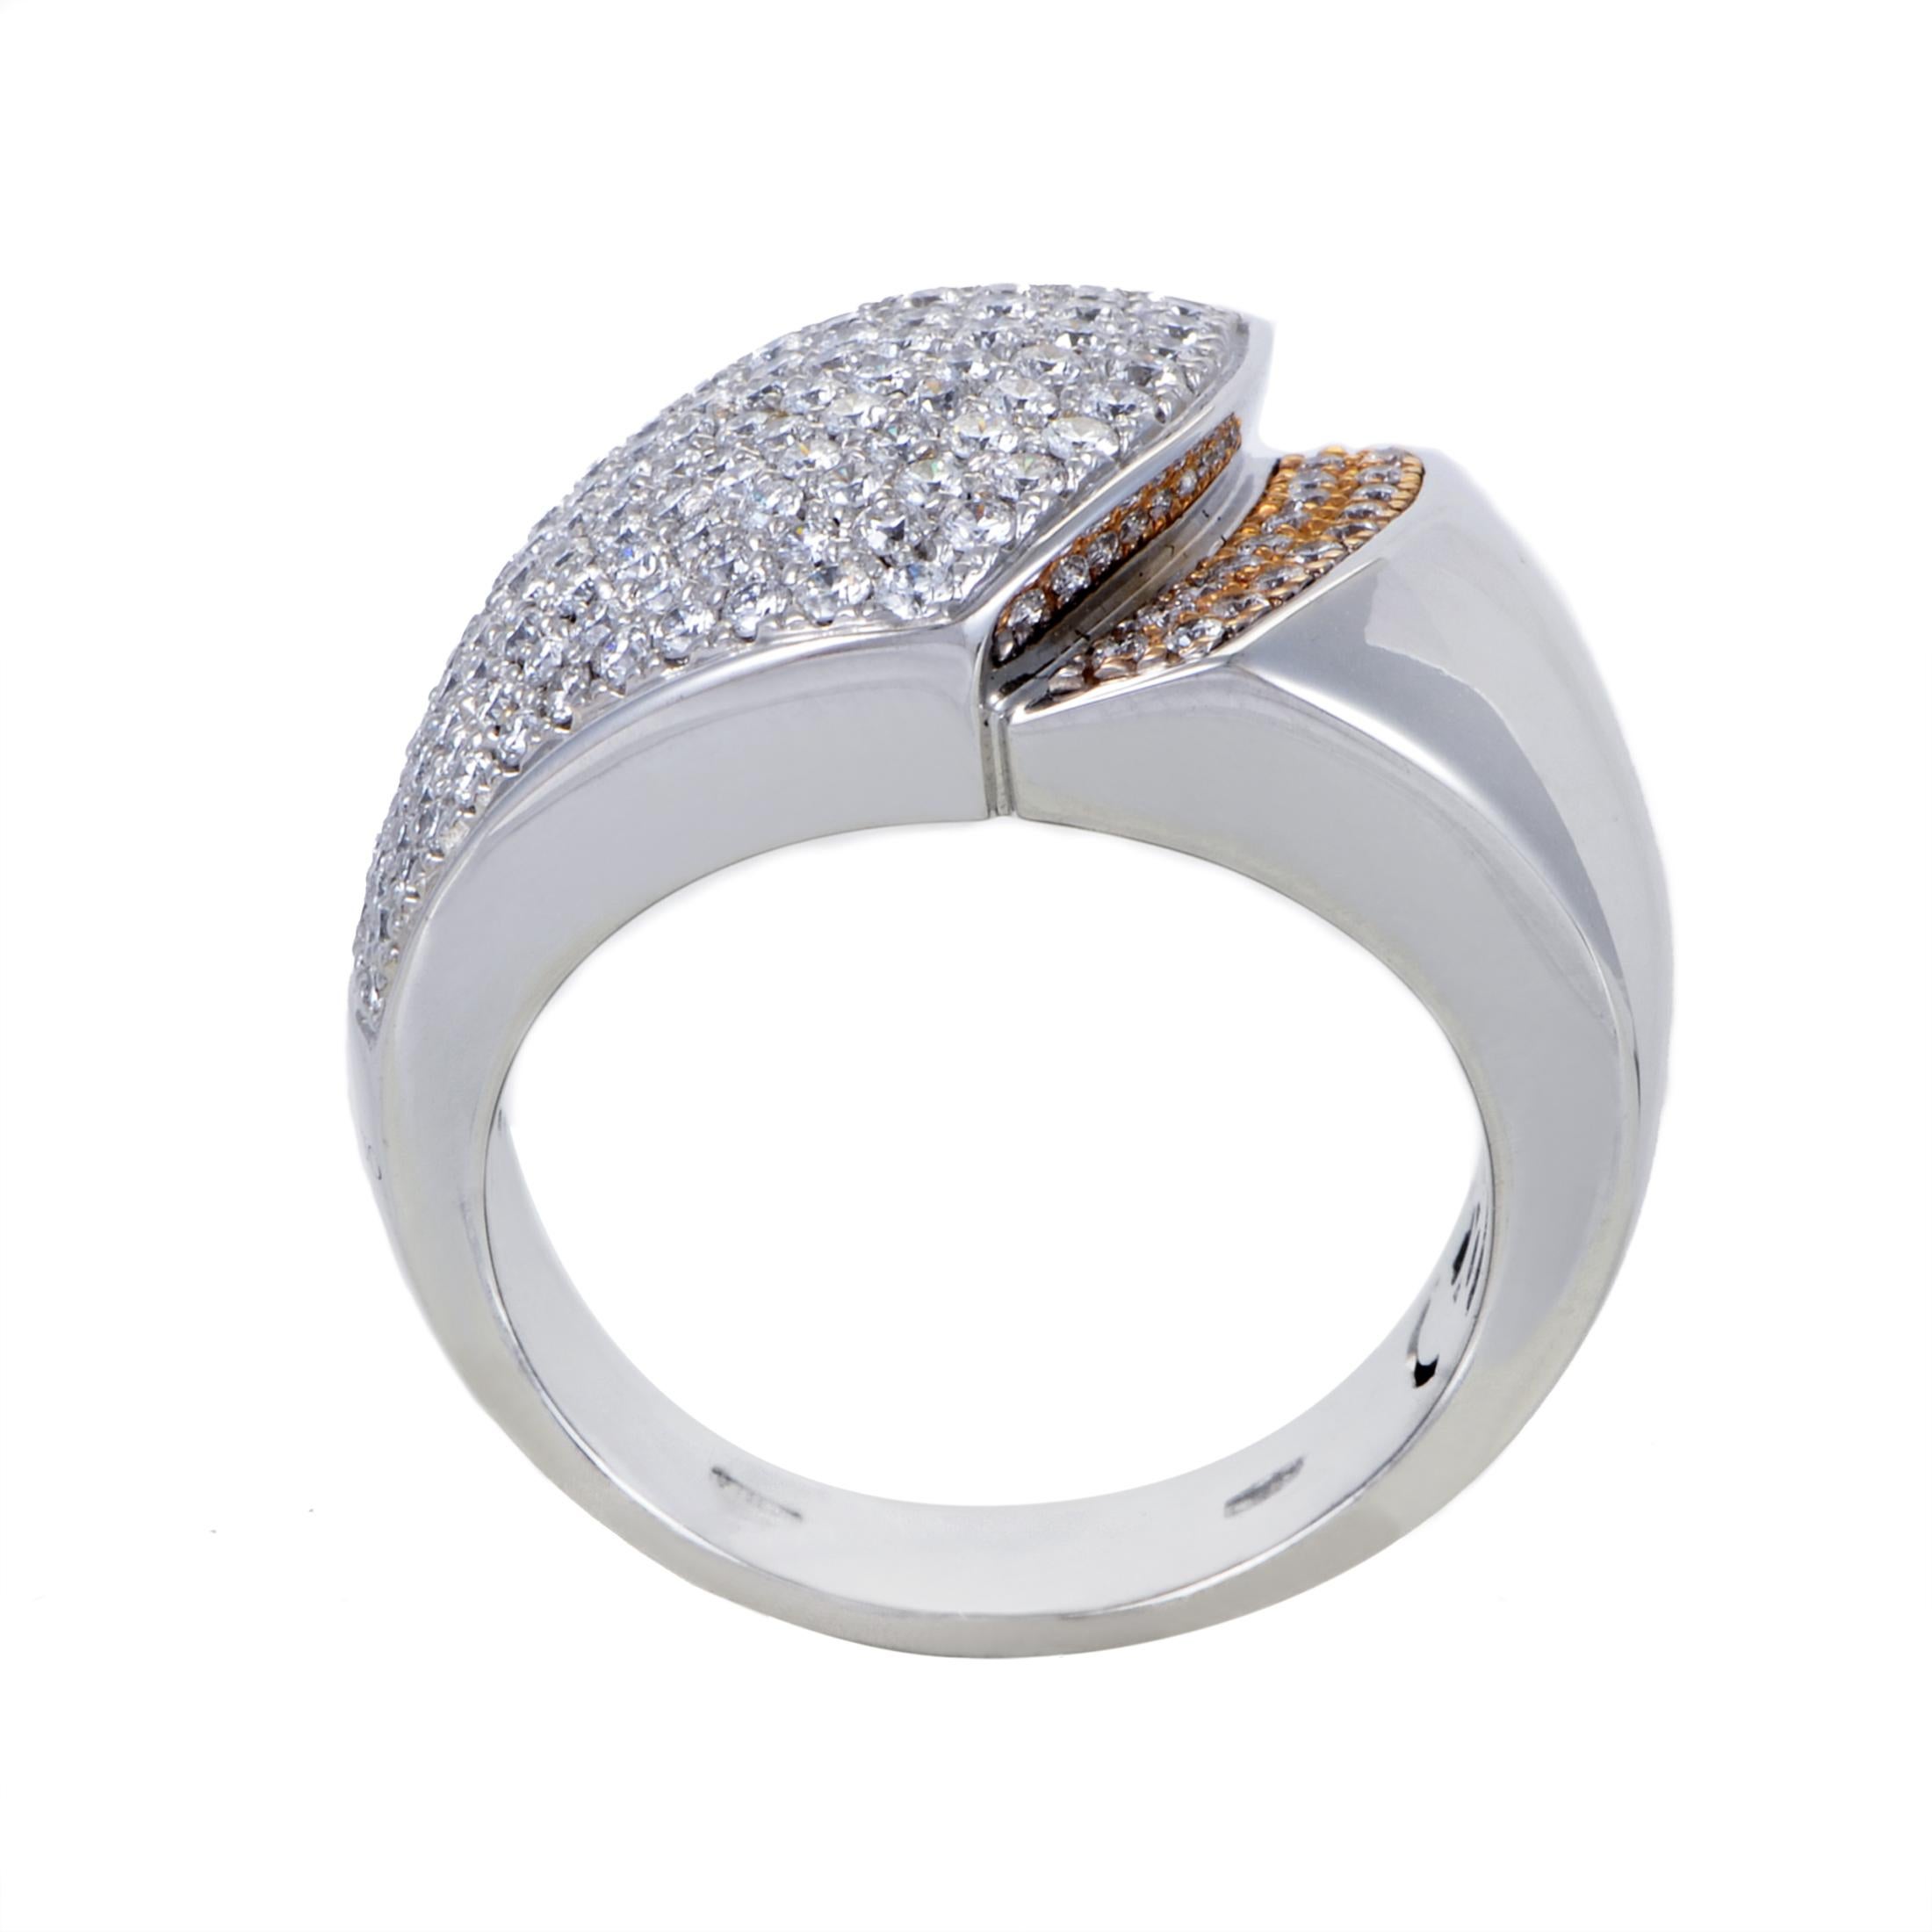 This dazzling ring from Chimento's Desiderio collection boasts a modern appeal that is quite eye-catching. The ring is made of 18K white gold and is accented with a golden yellow color, as well as 1.40ct of diamonds.
